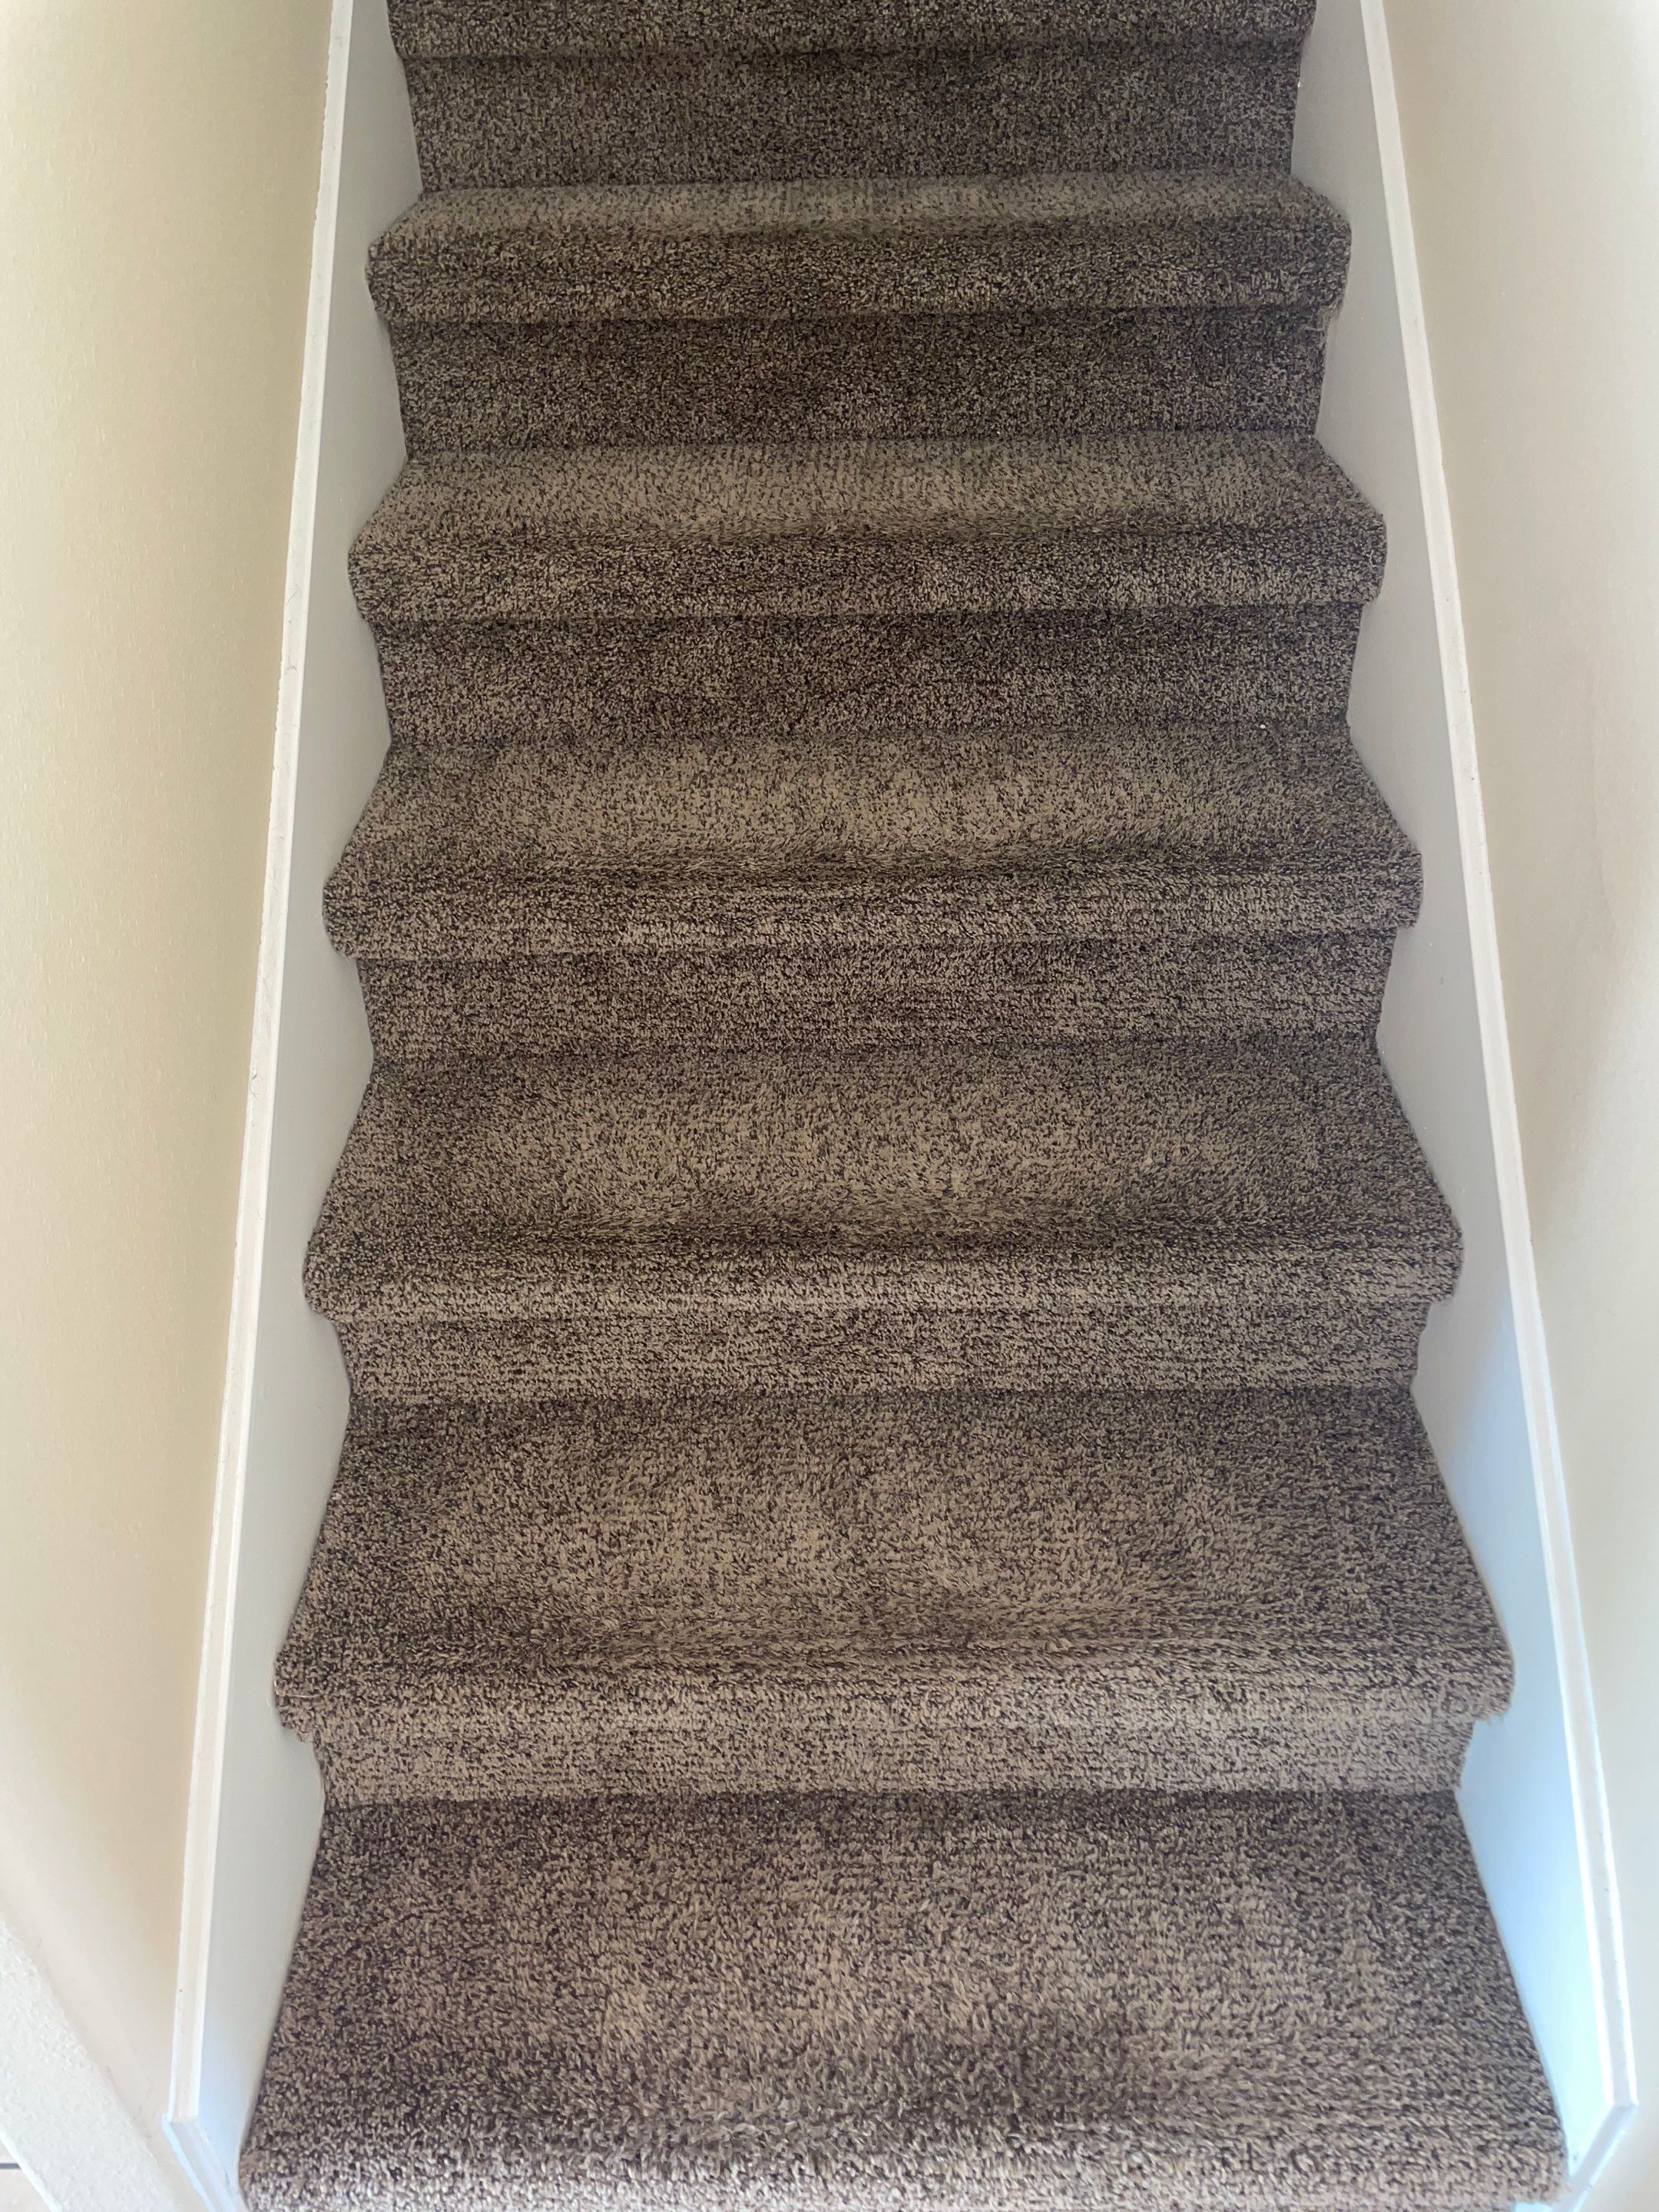 carpet cleaning on staircase deep steam cleaning dirt extraction and stain removal service in san antonio